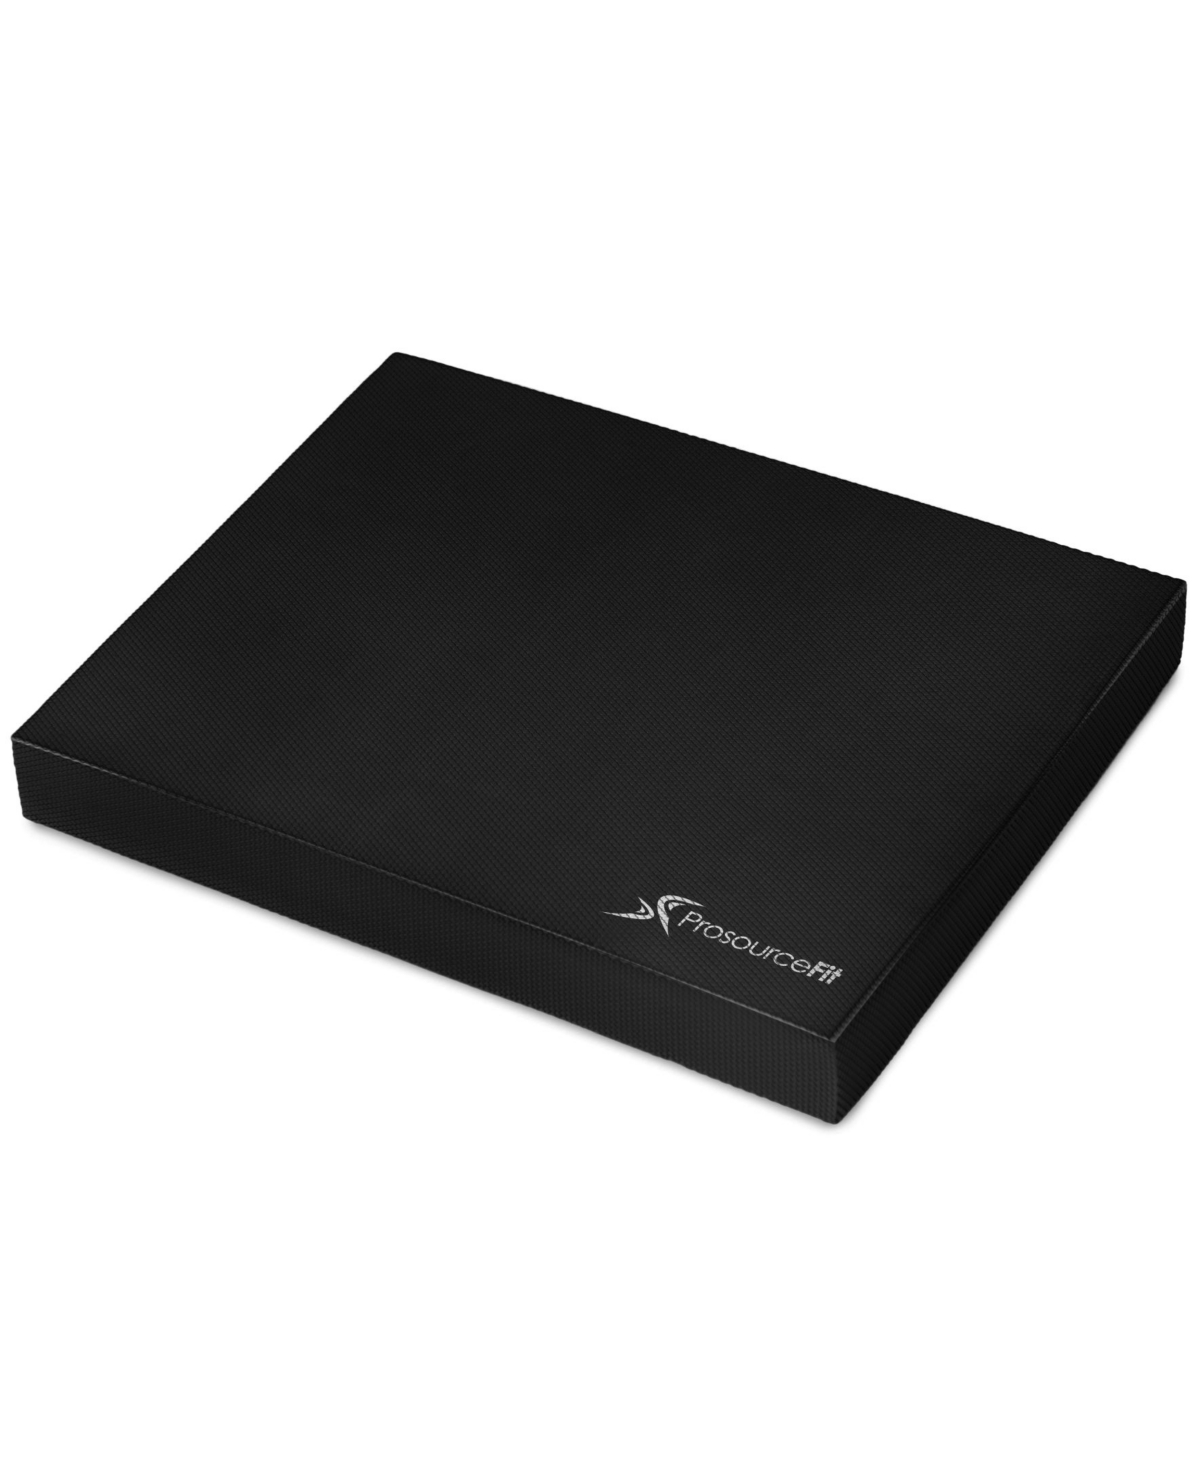 Exercise Balance Pad 15x18.75-in - Black